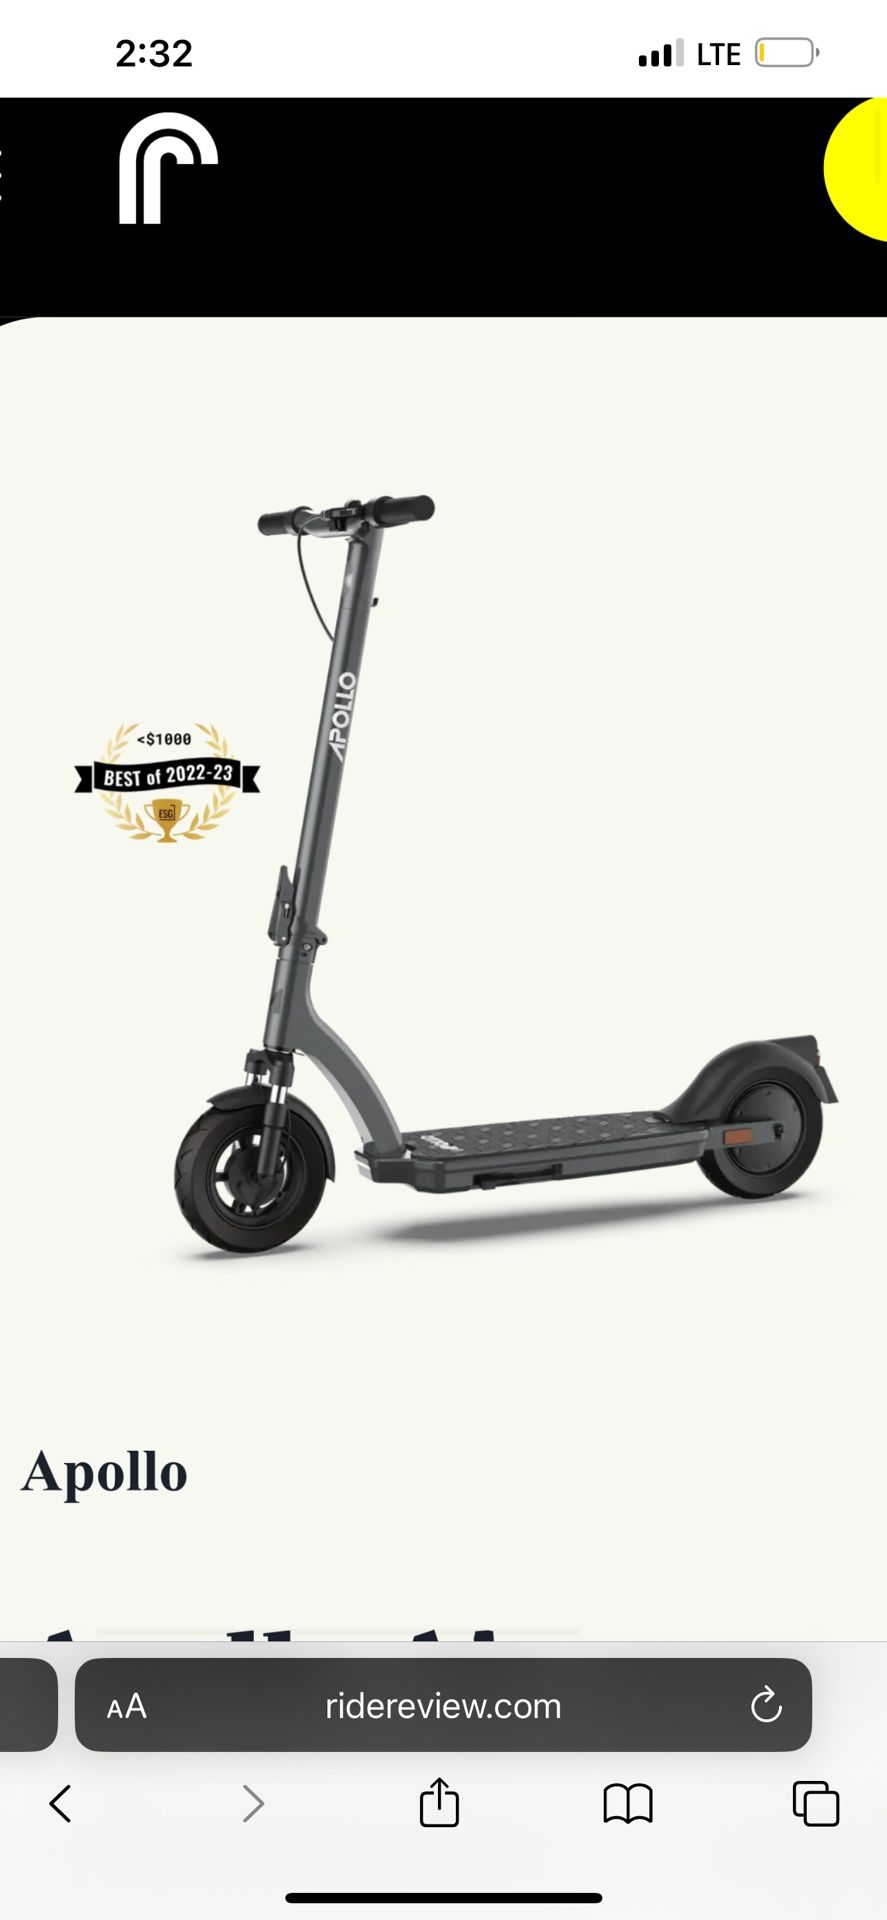 APOLLO AIR 2022 Electric Scooter / 500w / 20 mph / 20 mile Range / plus front Shocks / smooth ride